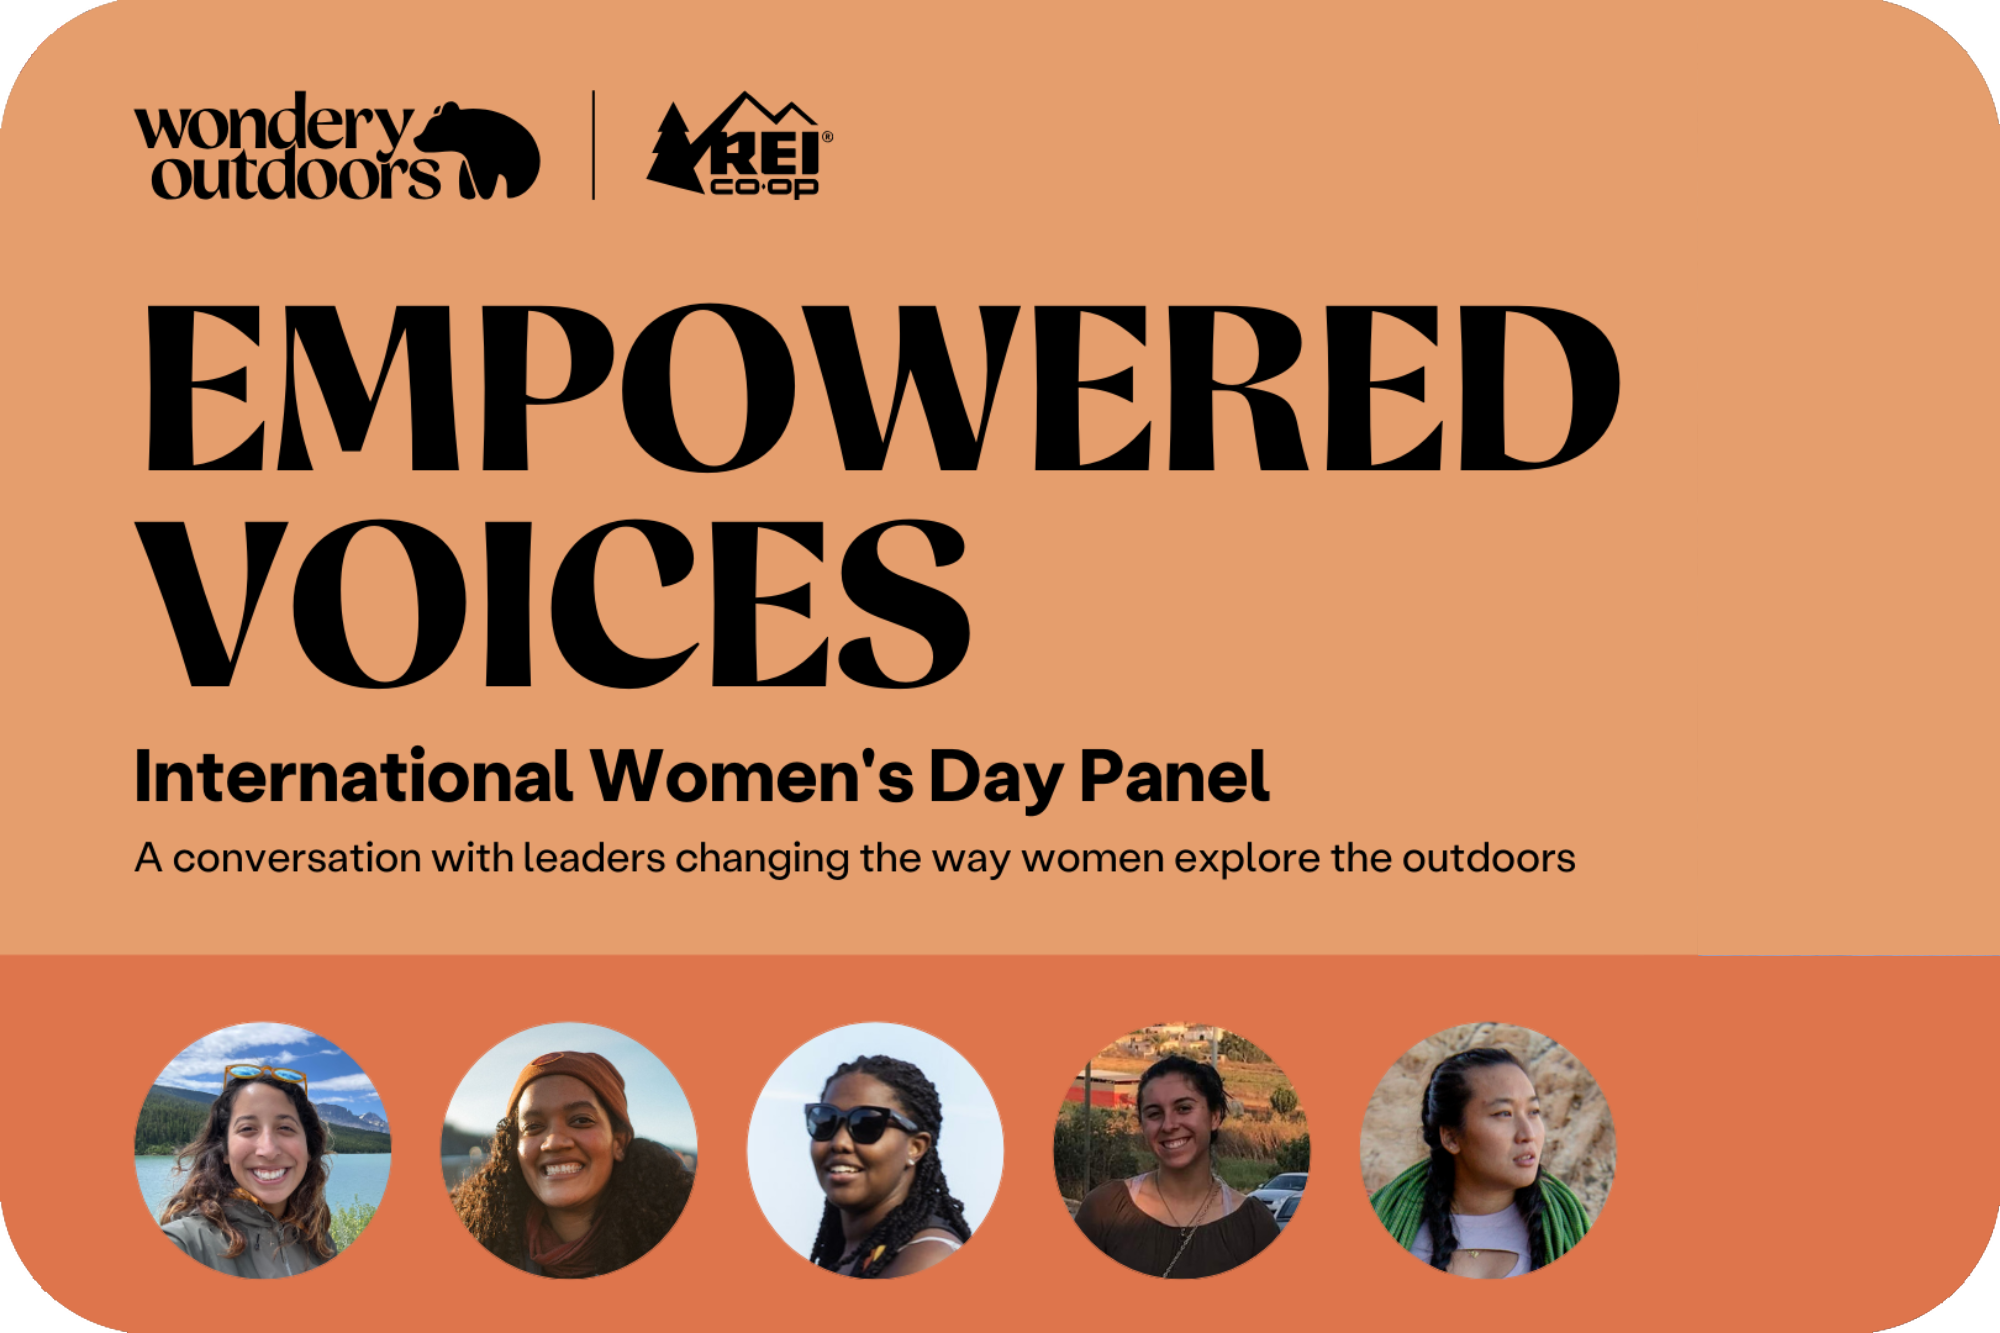 REI Empowered Voices Panel